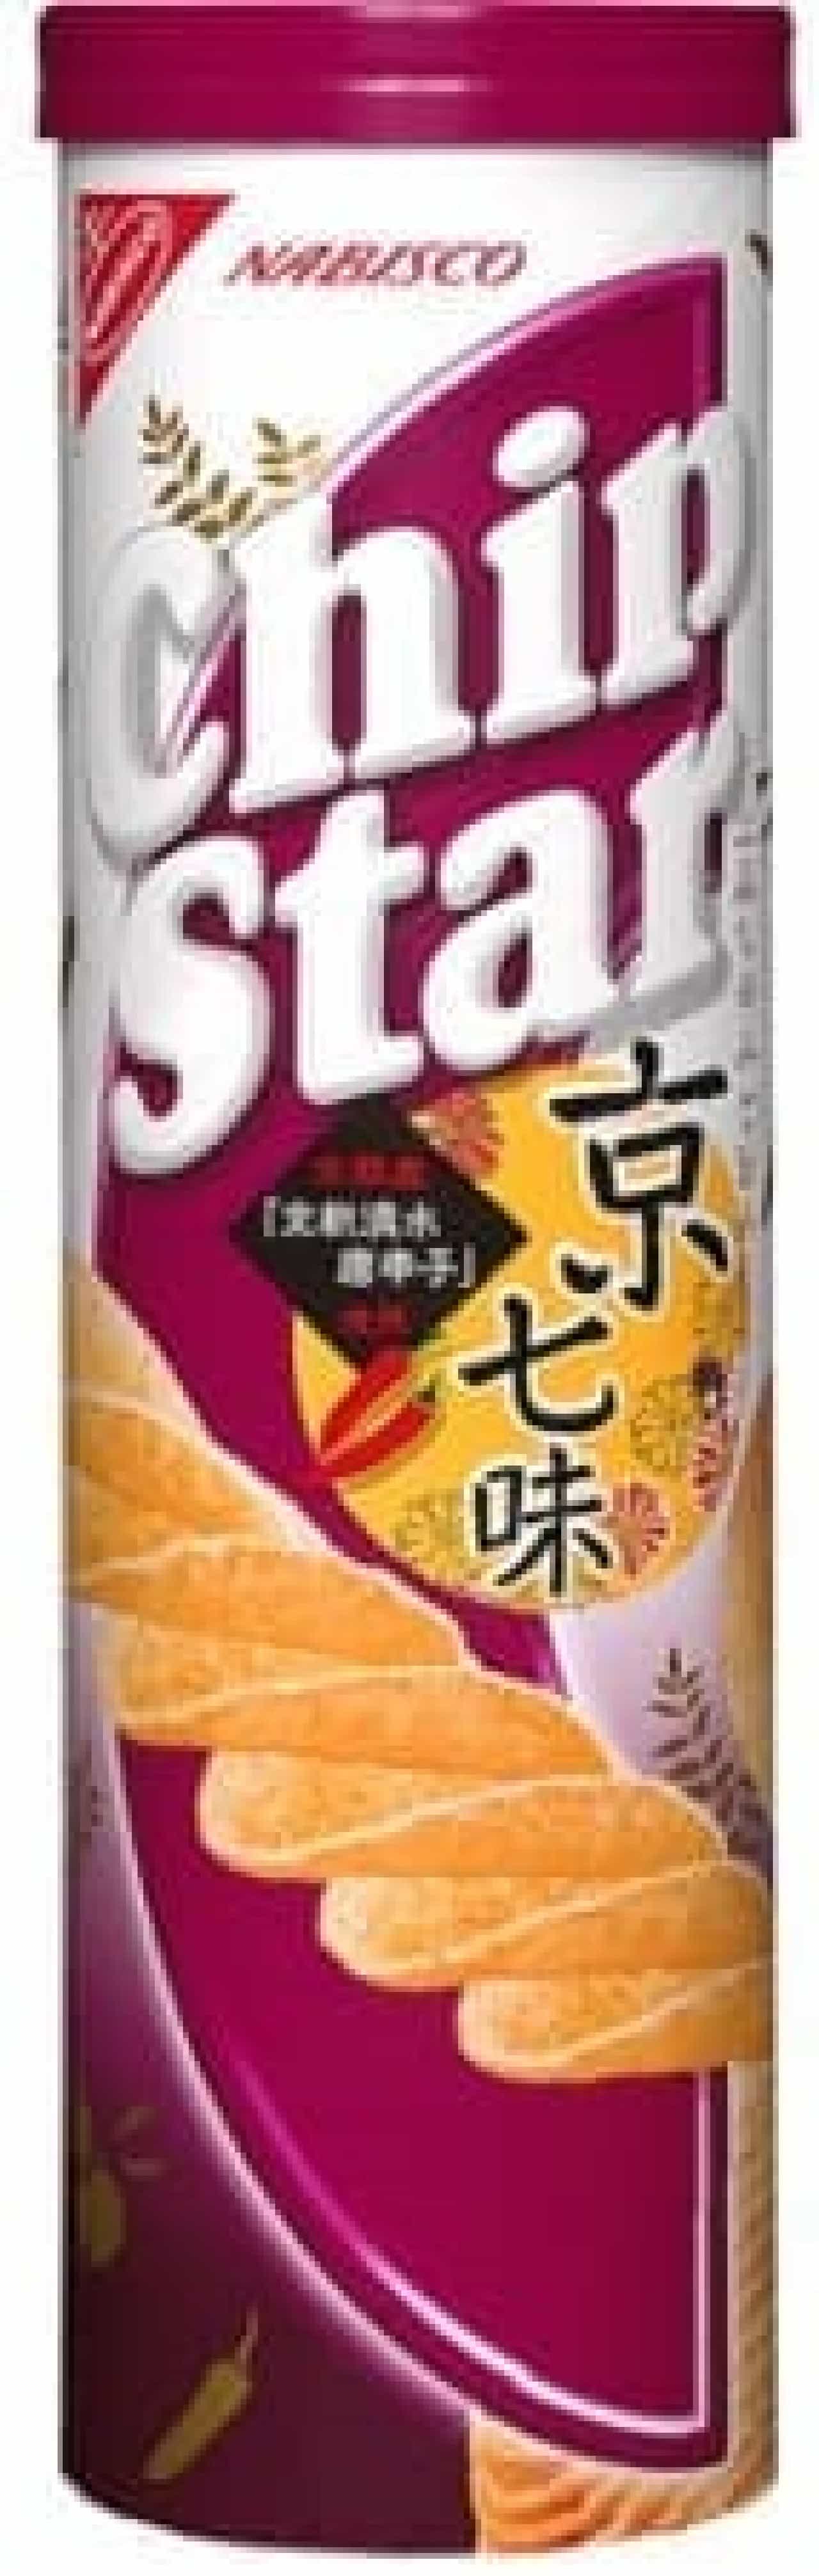 Japanese-flavored chip star!